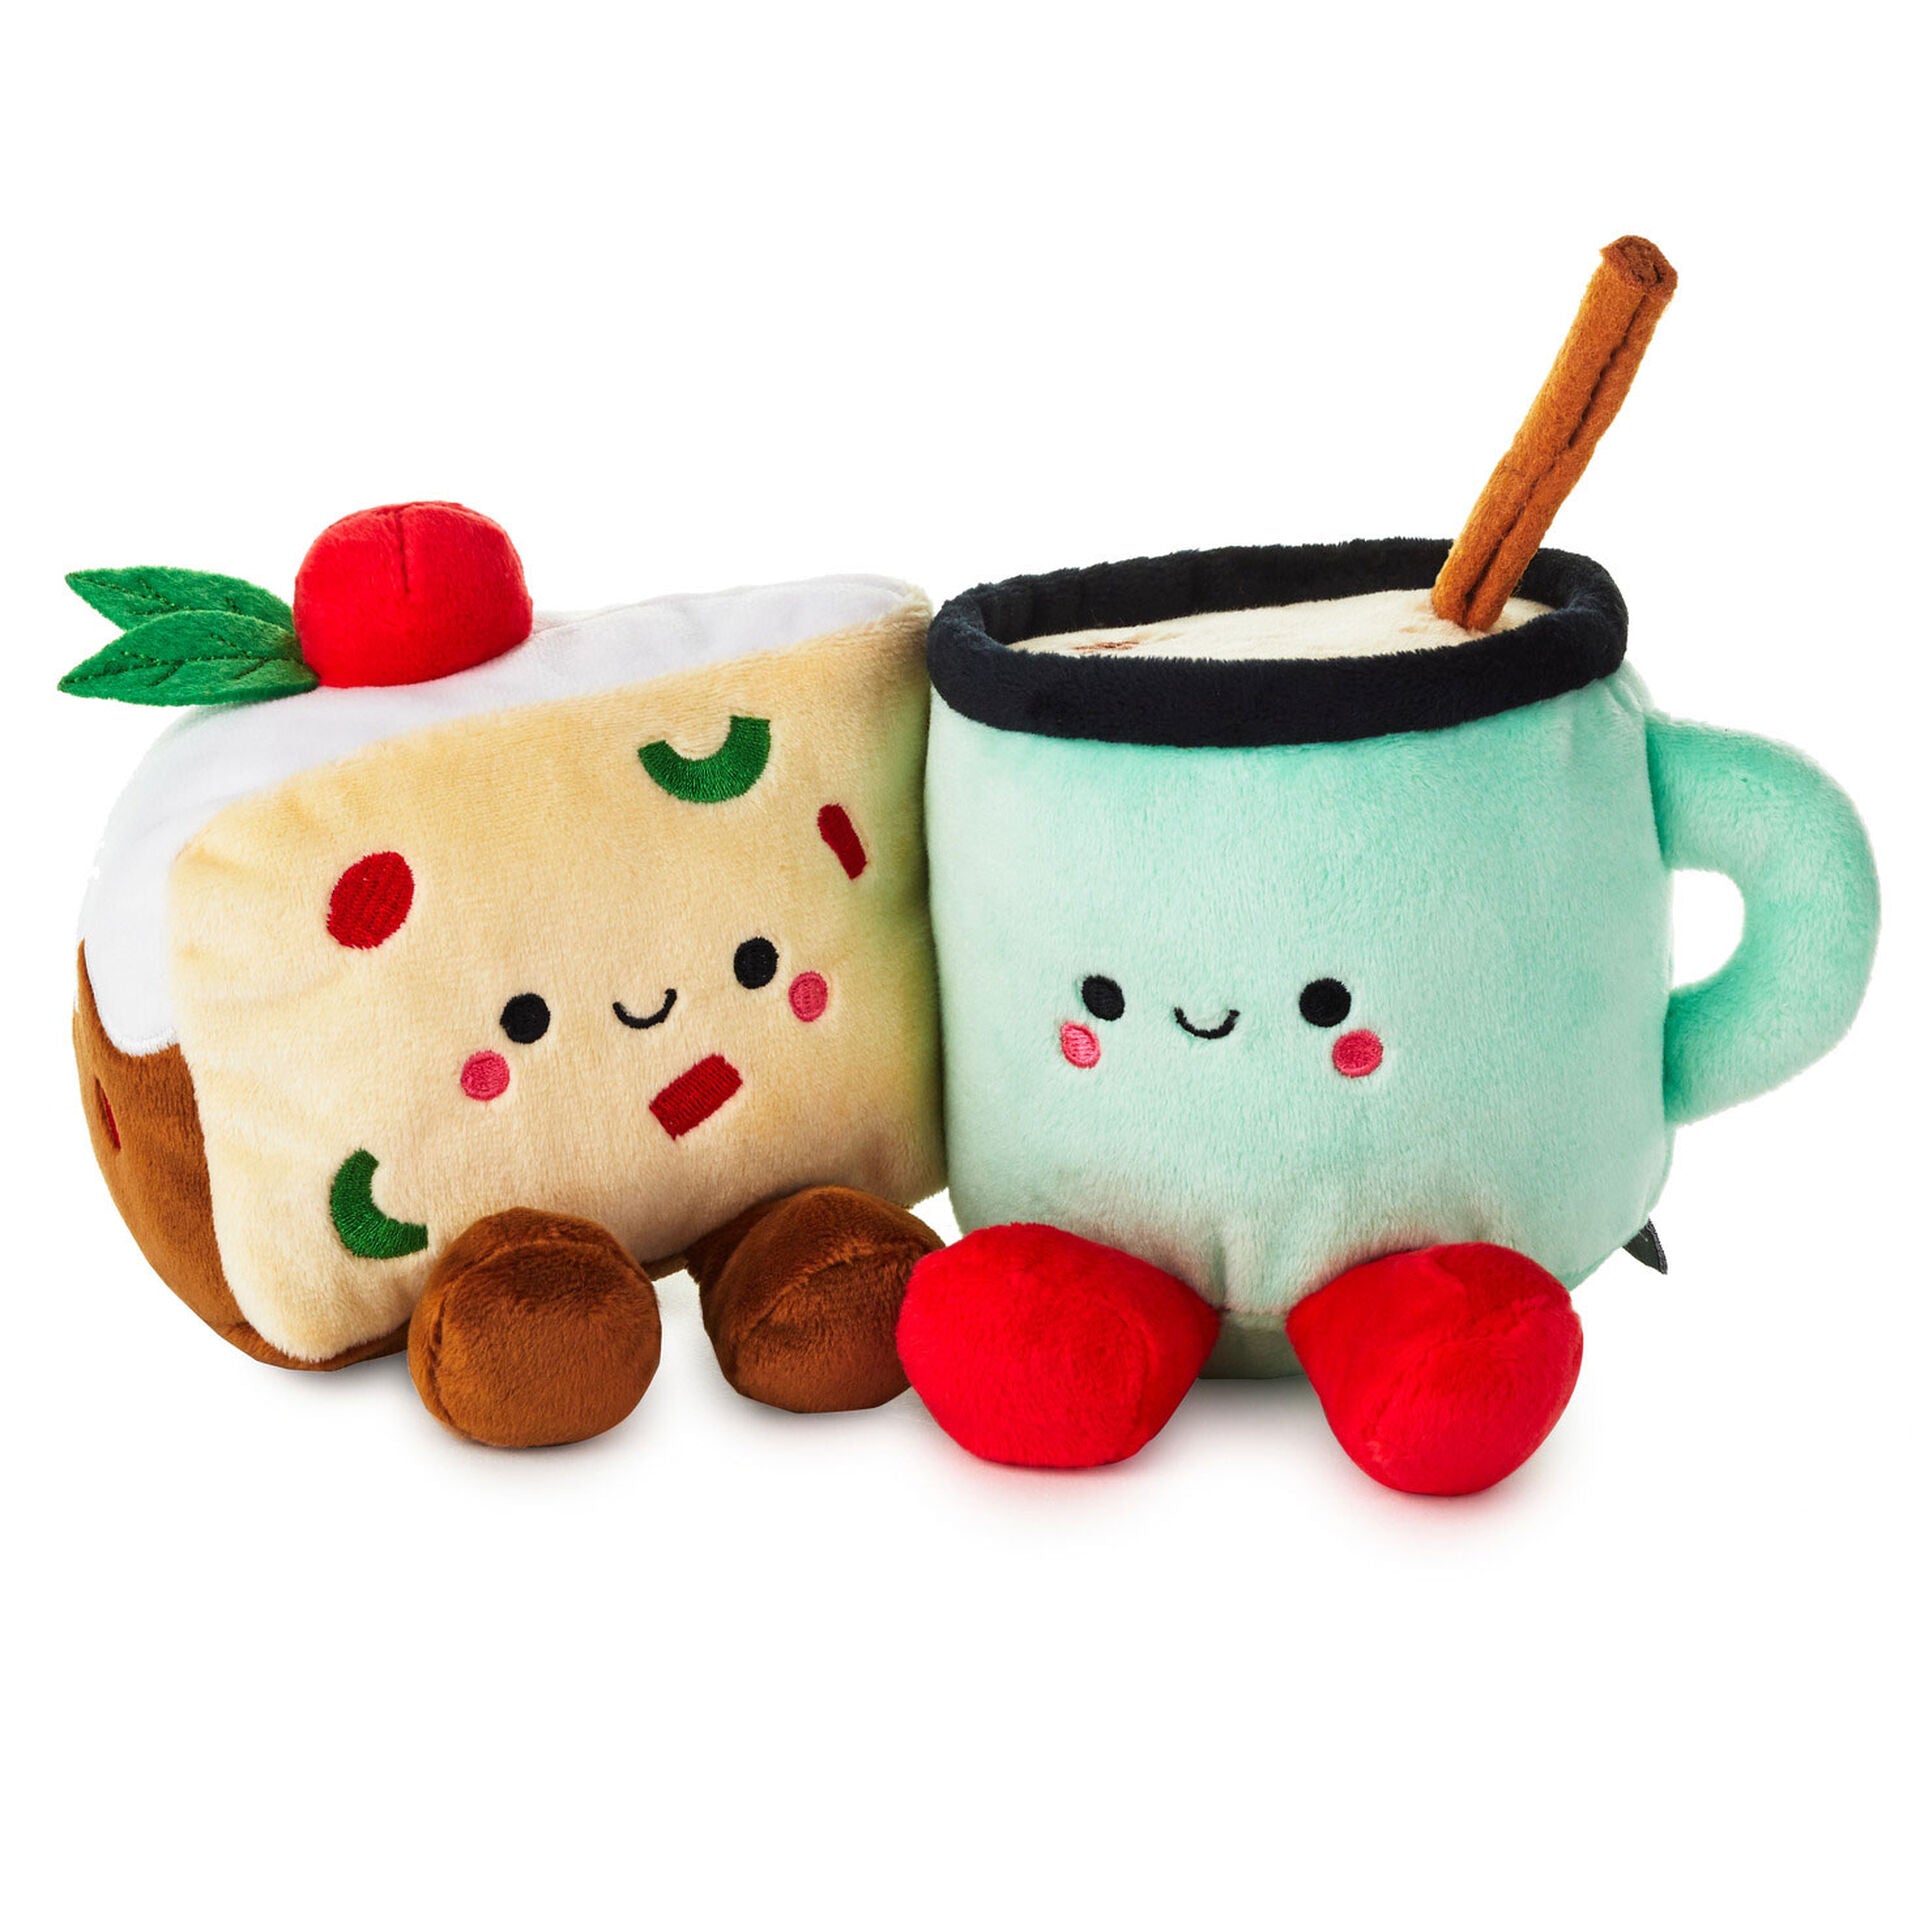 Better Together Caramel and Apple Magnetic Plush